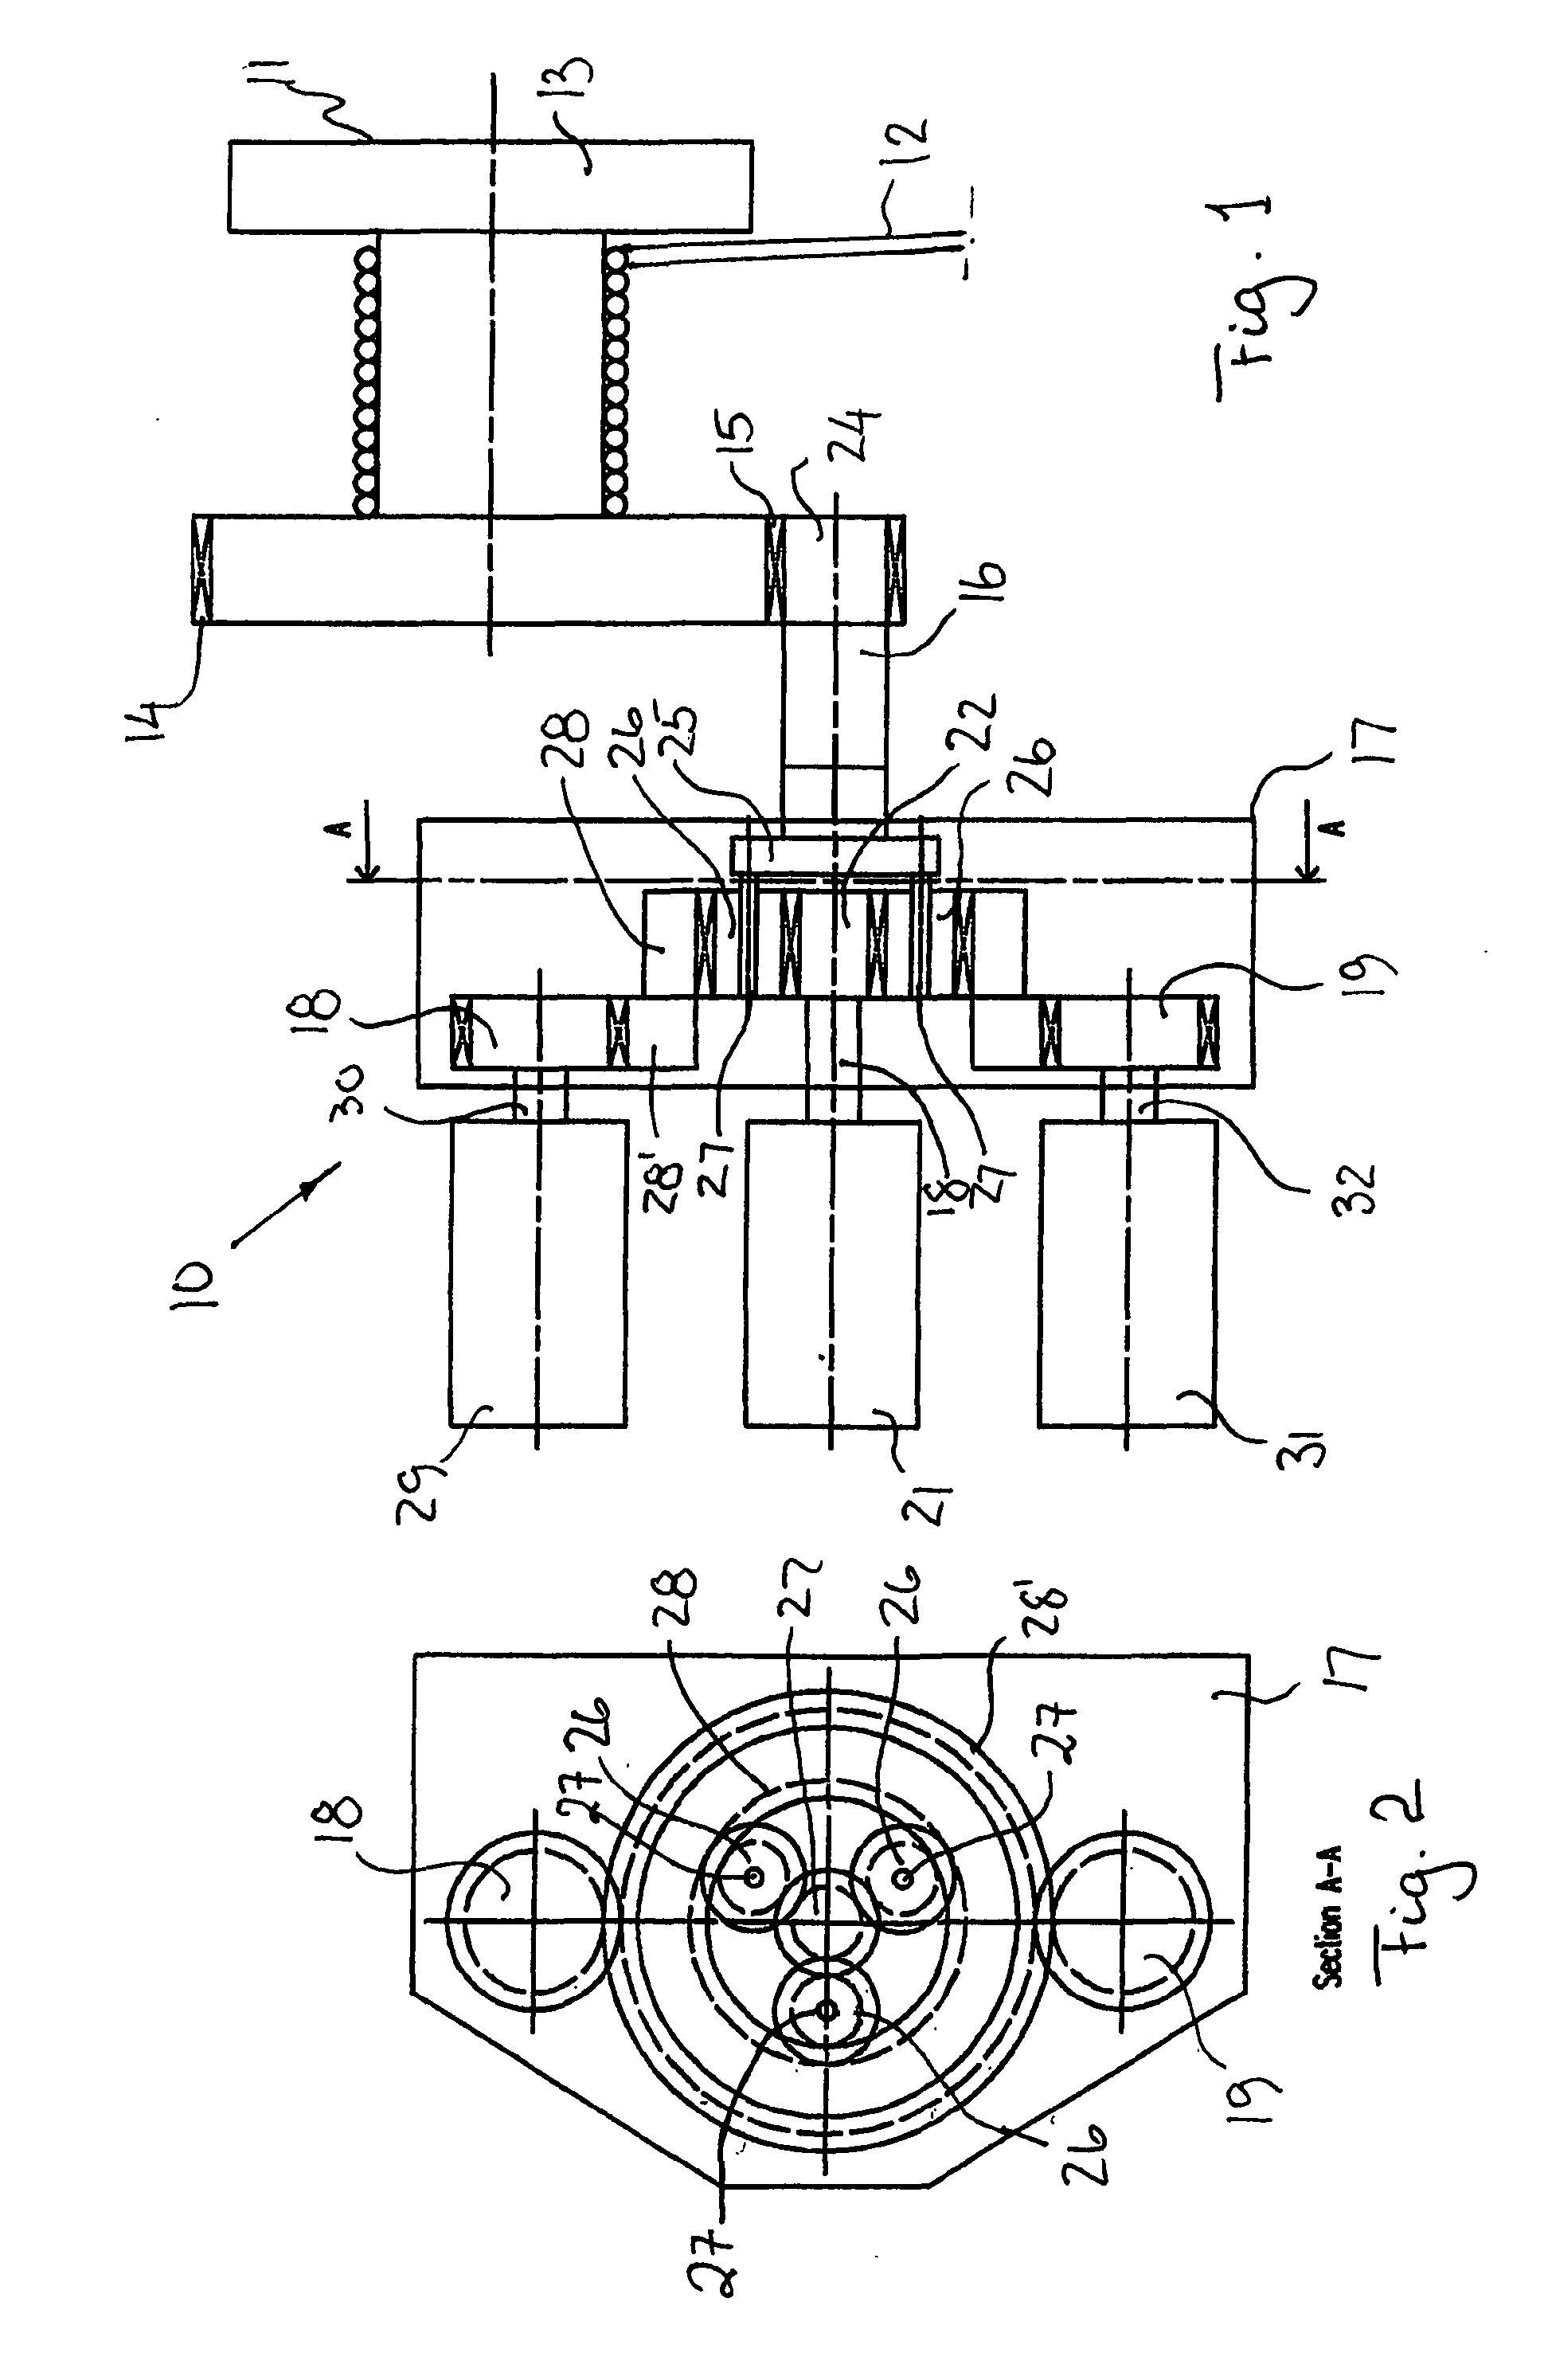 Method and System for Operating Winches and Use Thereof